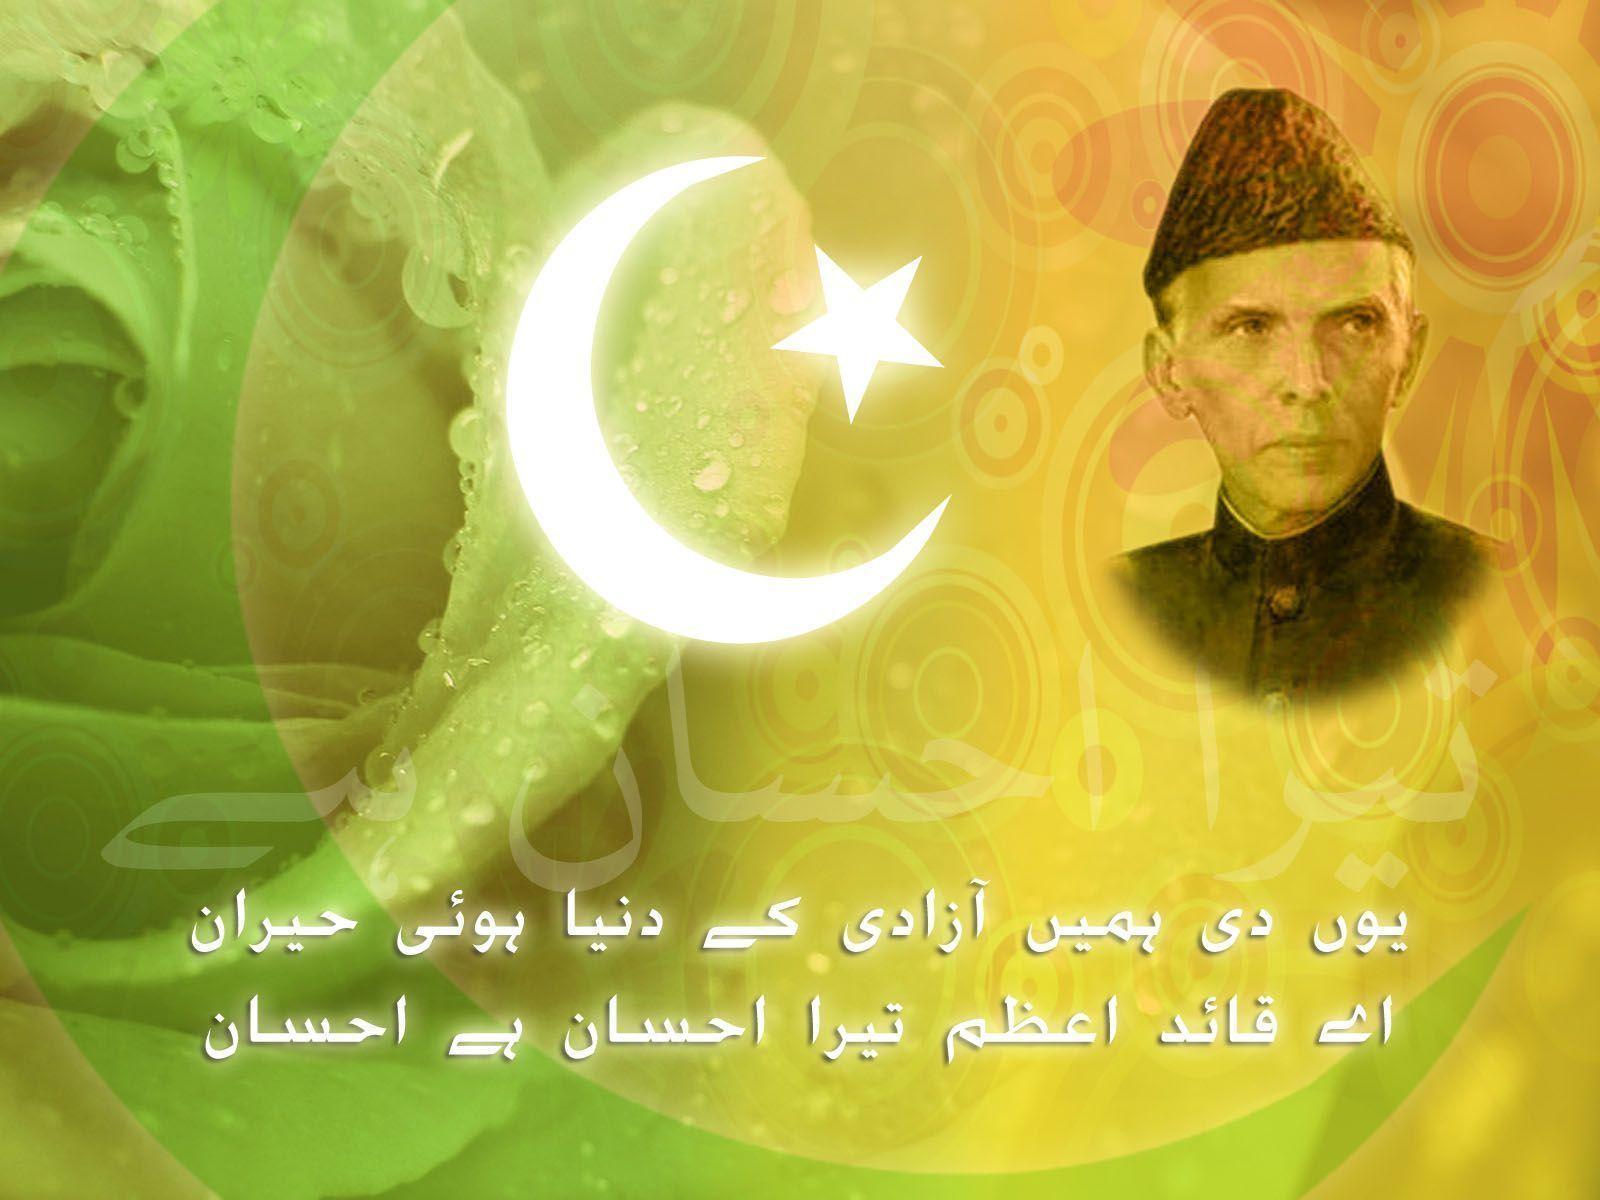 Best Pakistan Independence Day Quotes 2014 2015 SMS Wishes In English